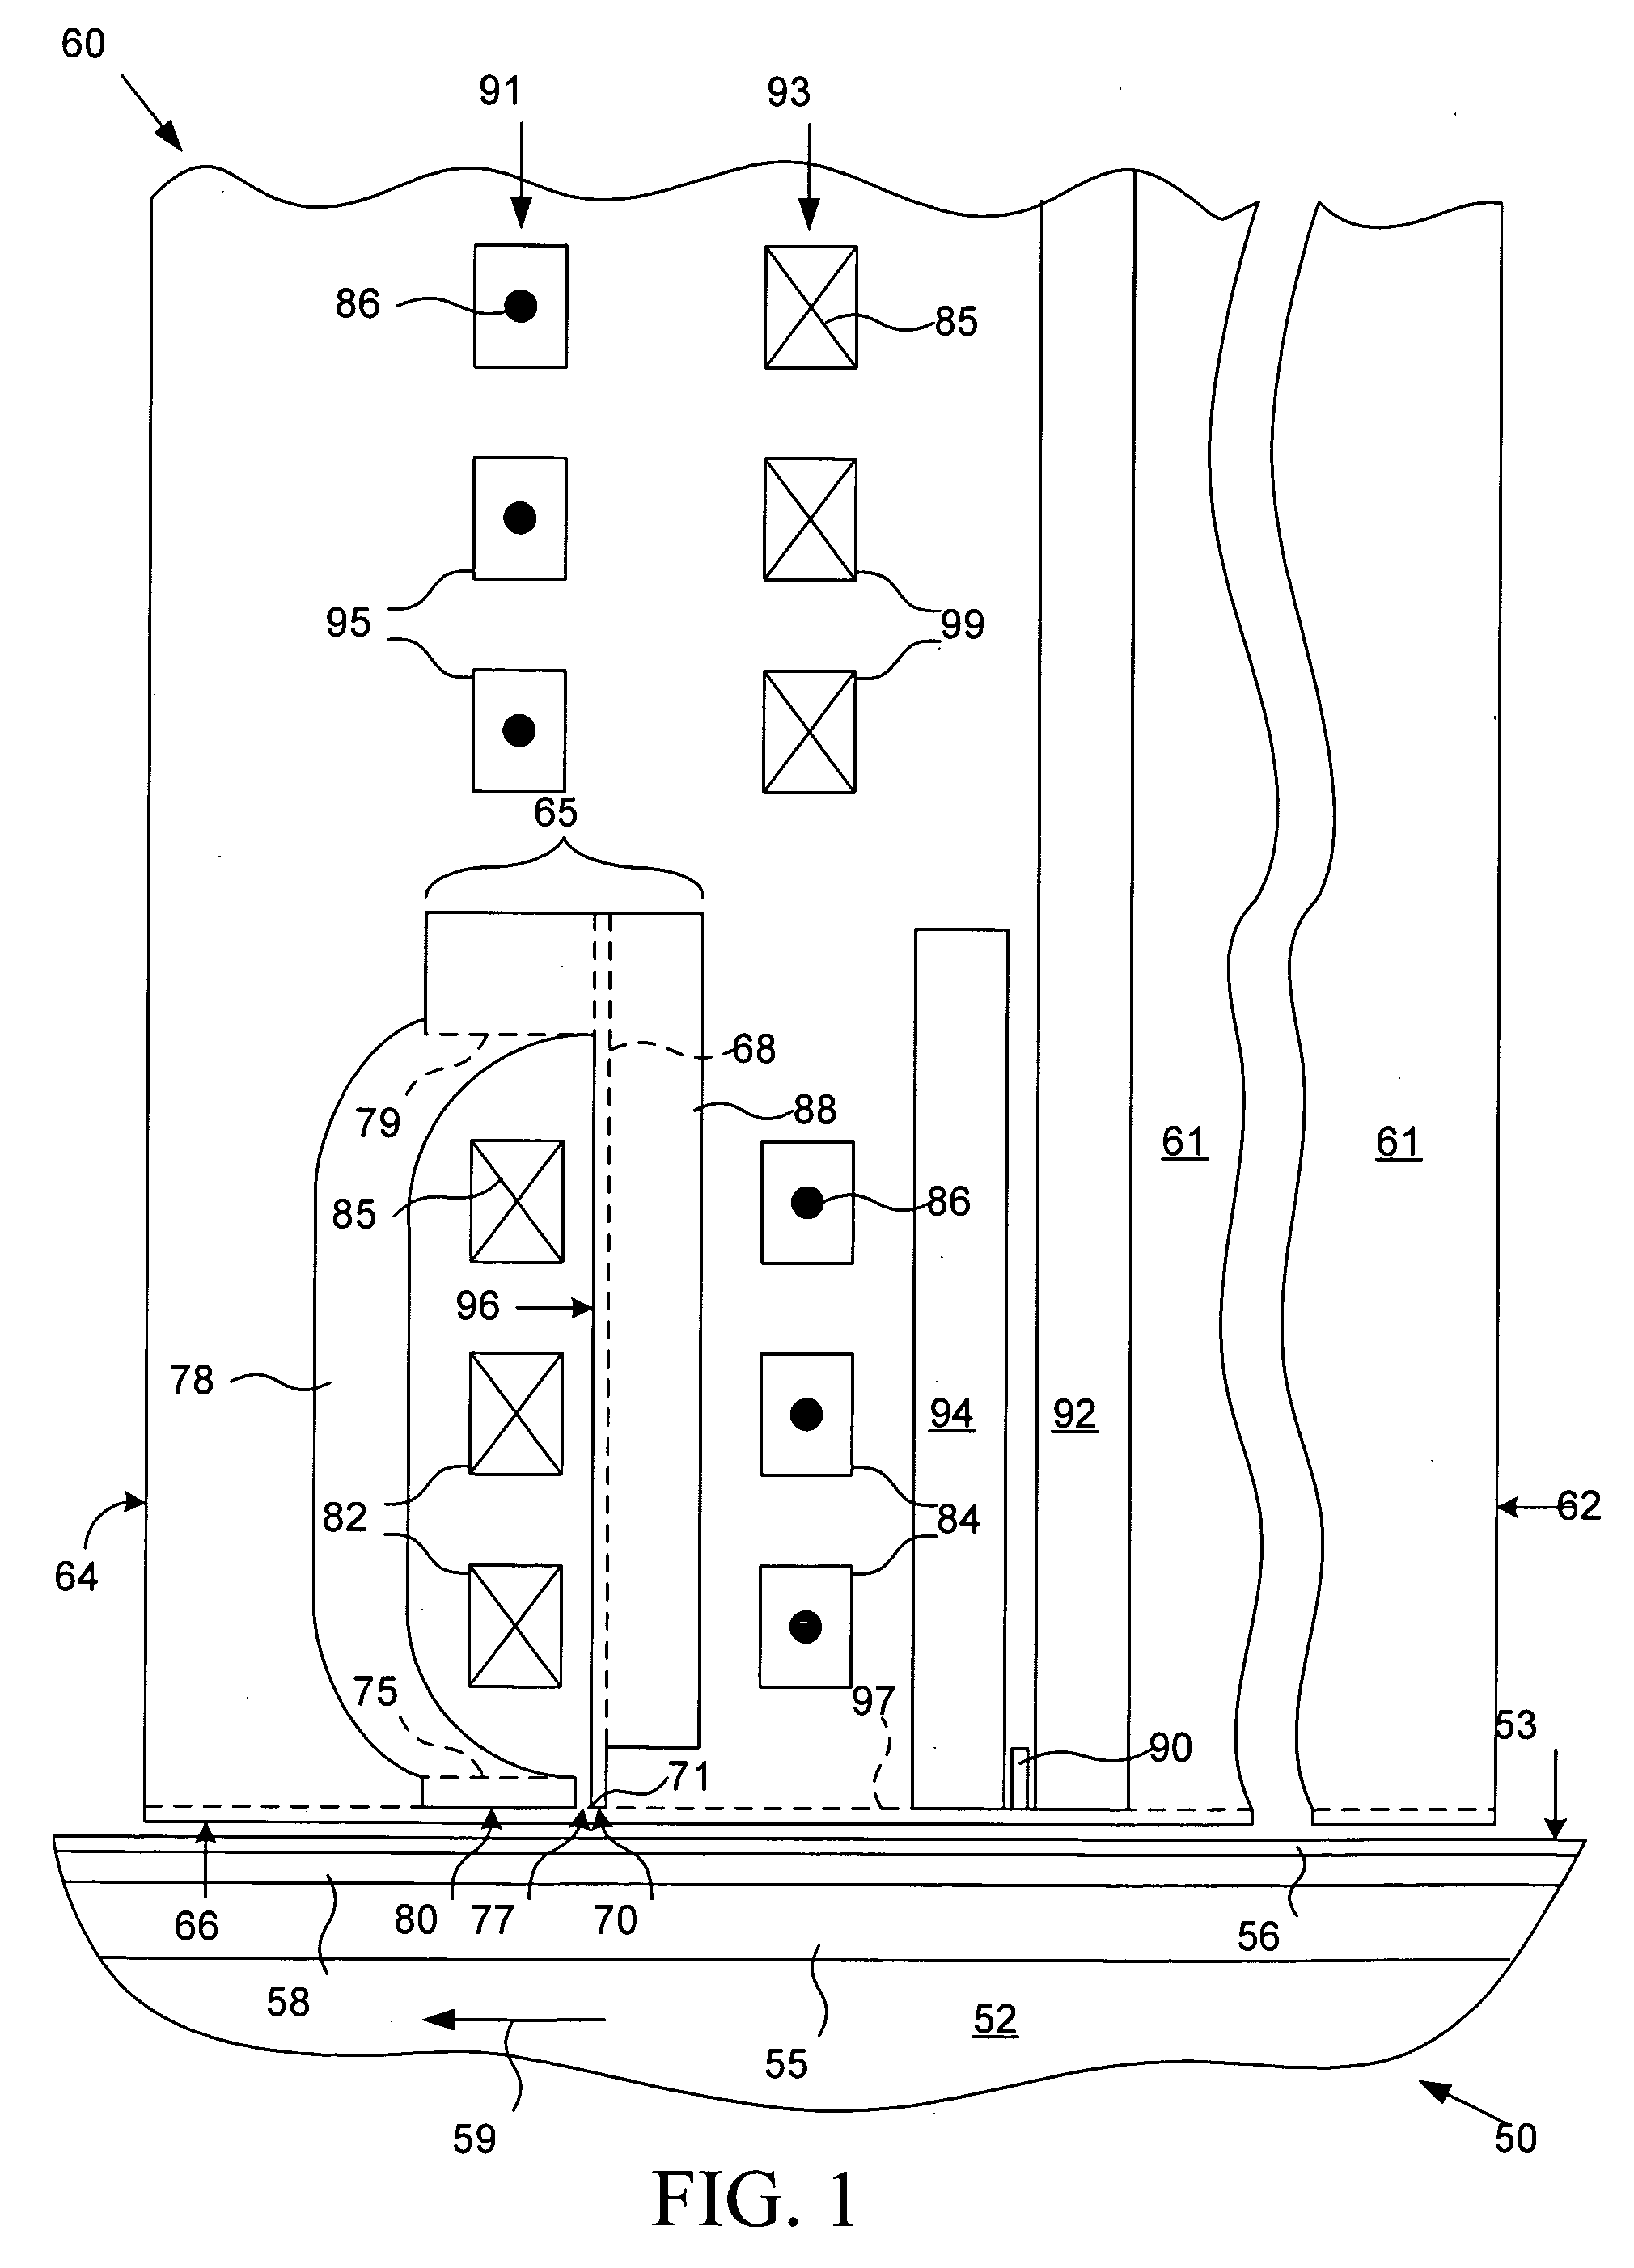 Magnetic head for perpendicular recording with magnetic loop providing non-perpendicular write field